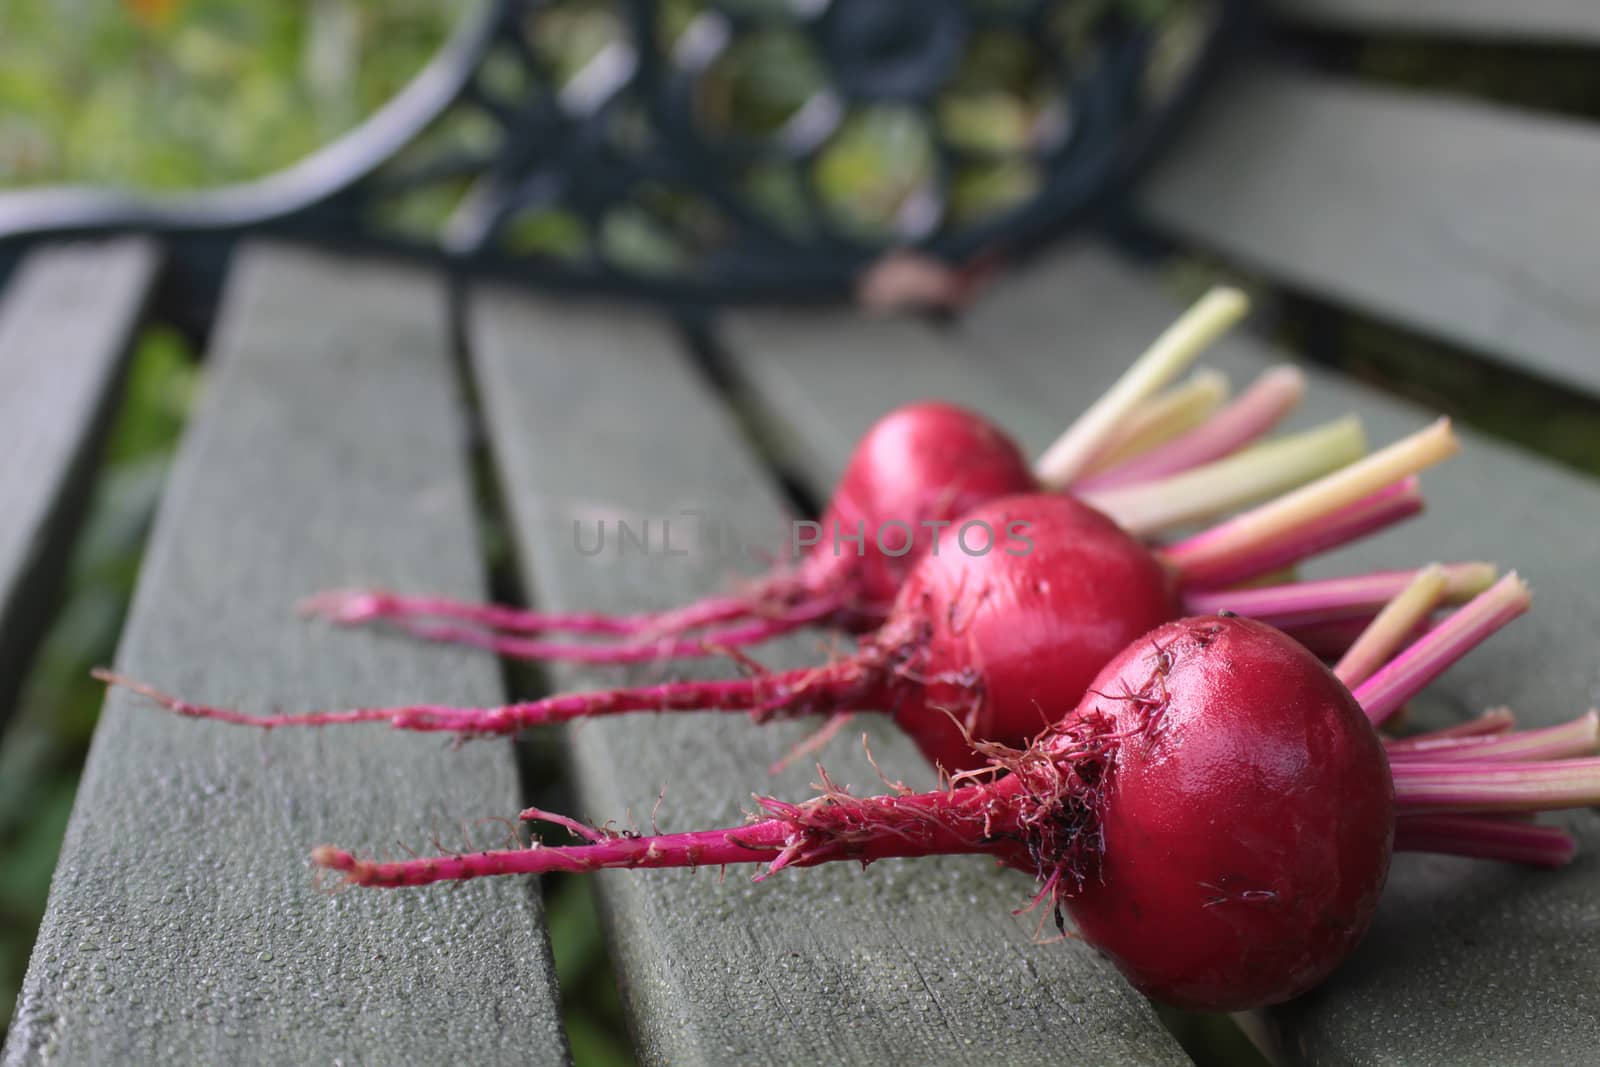 Three freshly picked beetroots, Chioggia, an Italian heirloom variety, with remains of stems attached. Set on a rustic green wooden garden bench base on a lansdcape format. Focus on foreground of image.